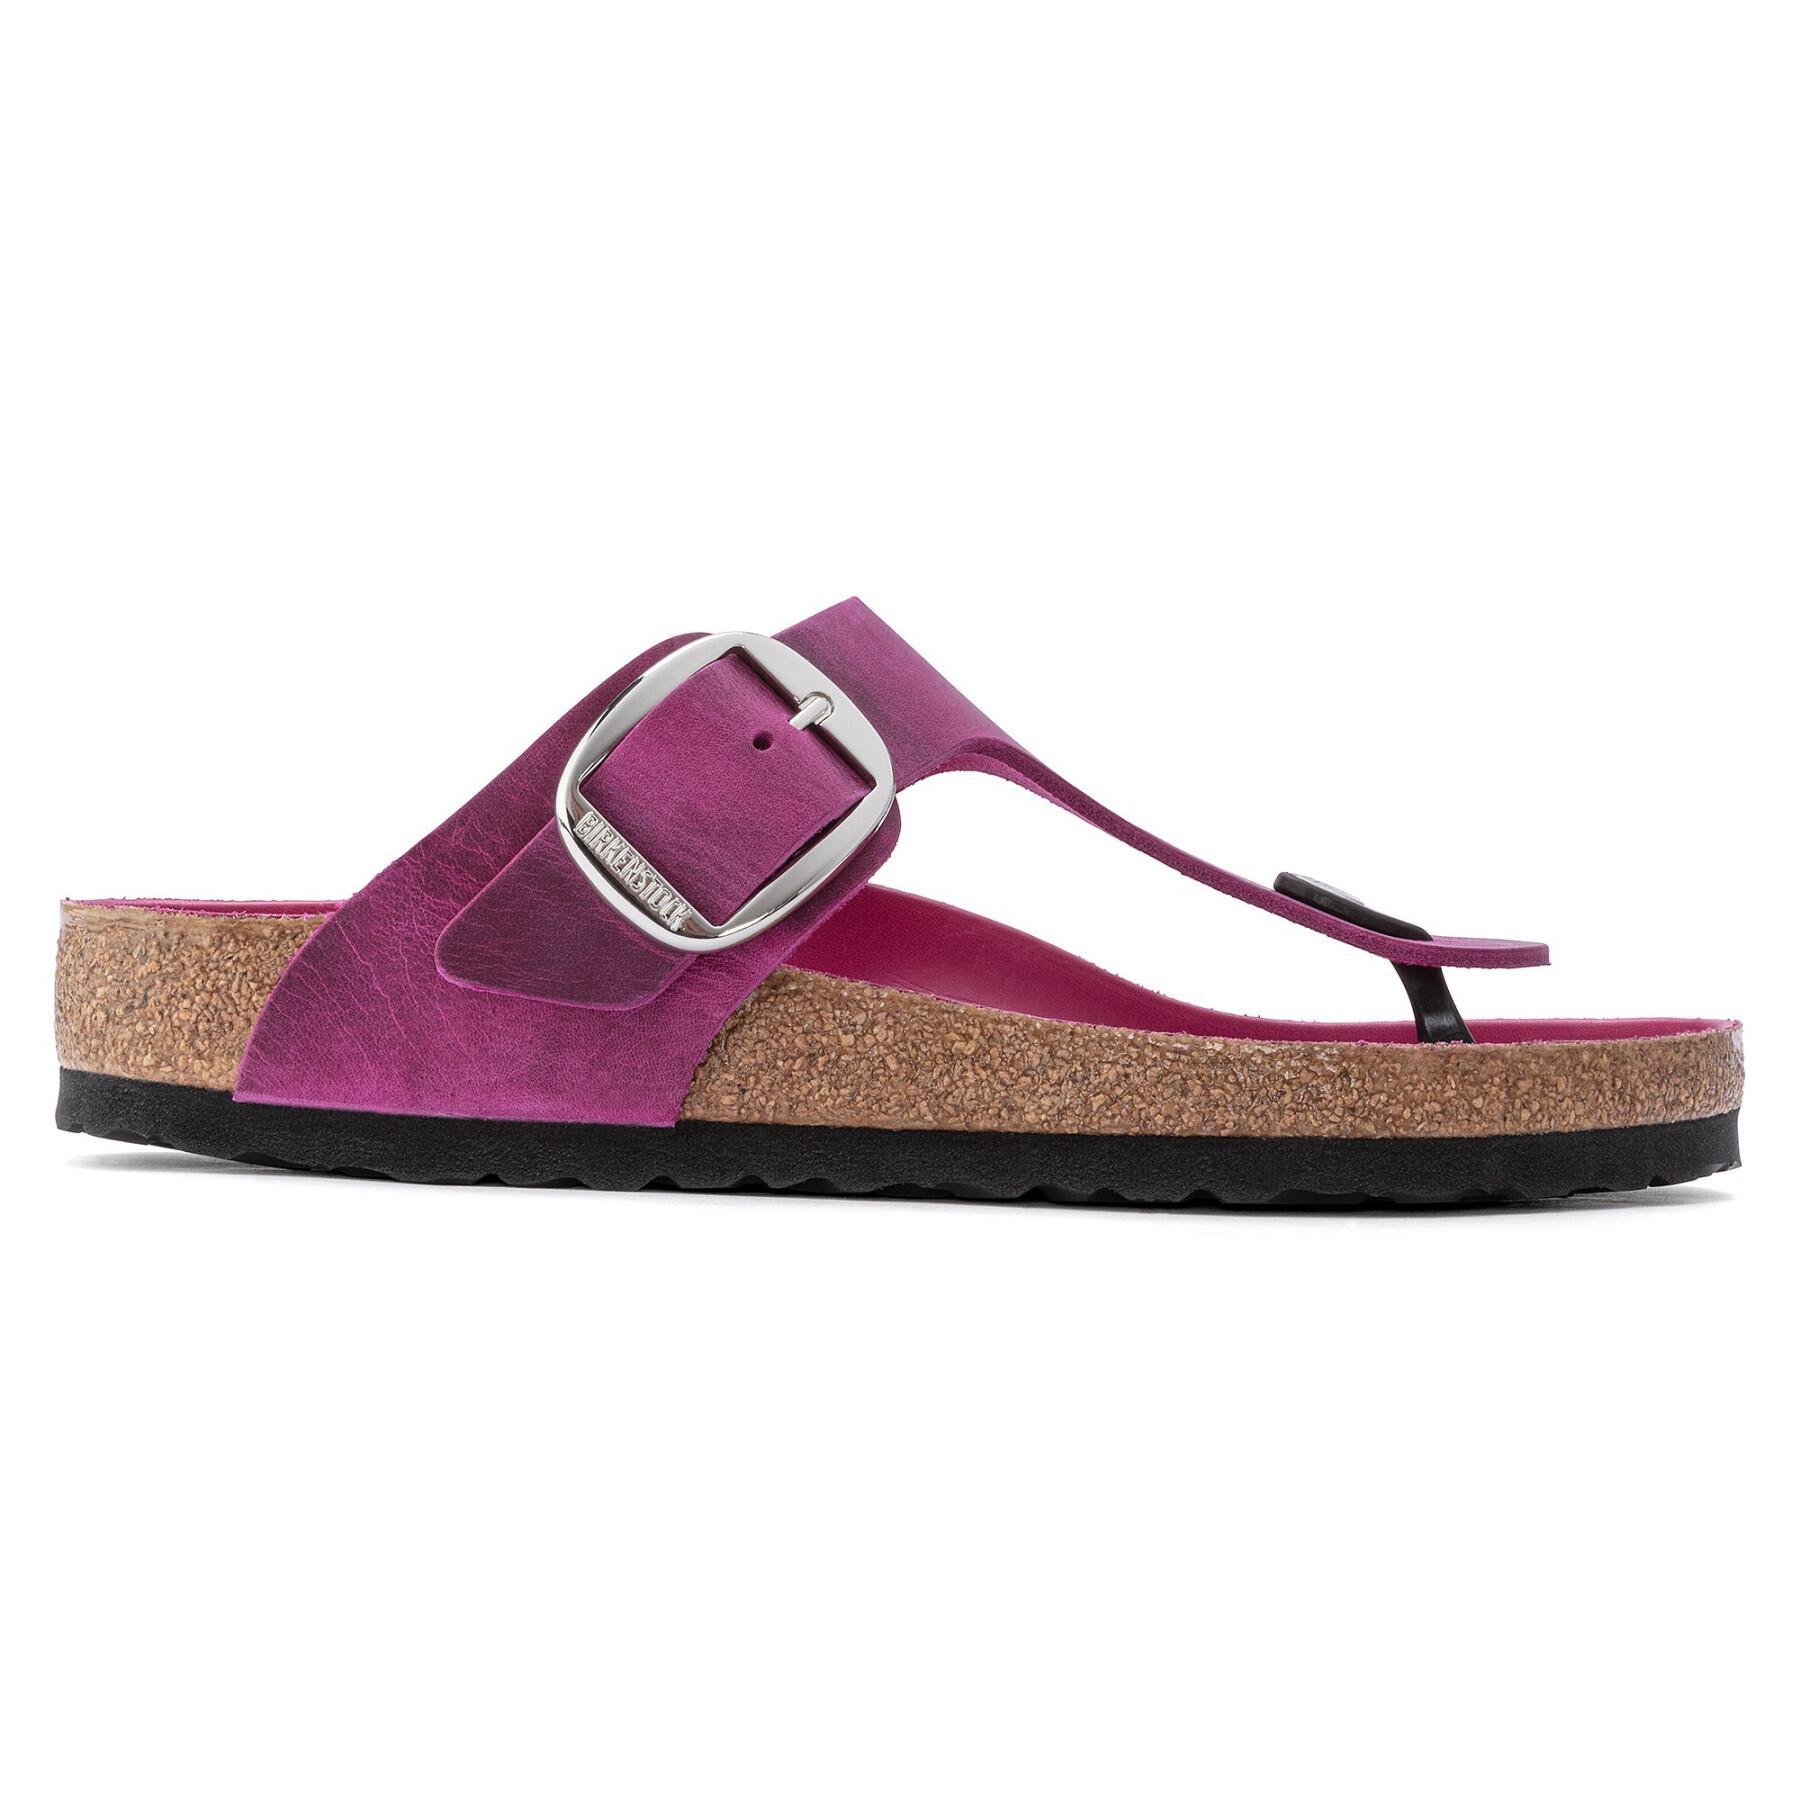 Sandals with big buckle oiled leather woman Birkenstock Gizeh